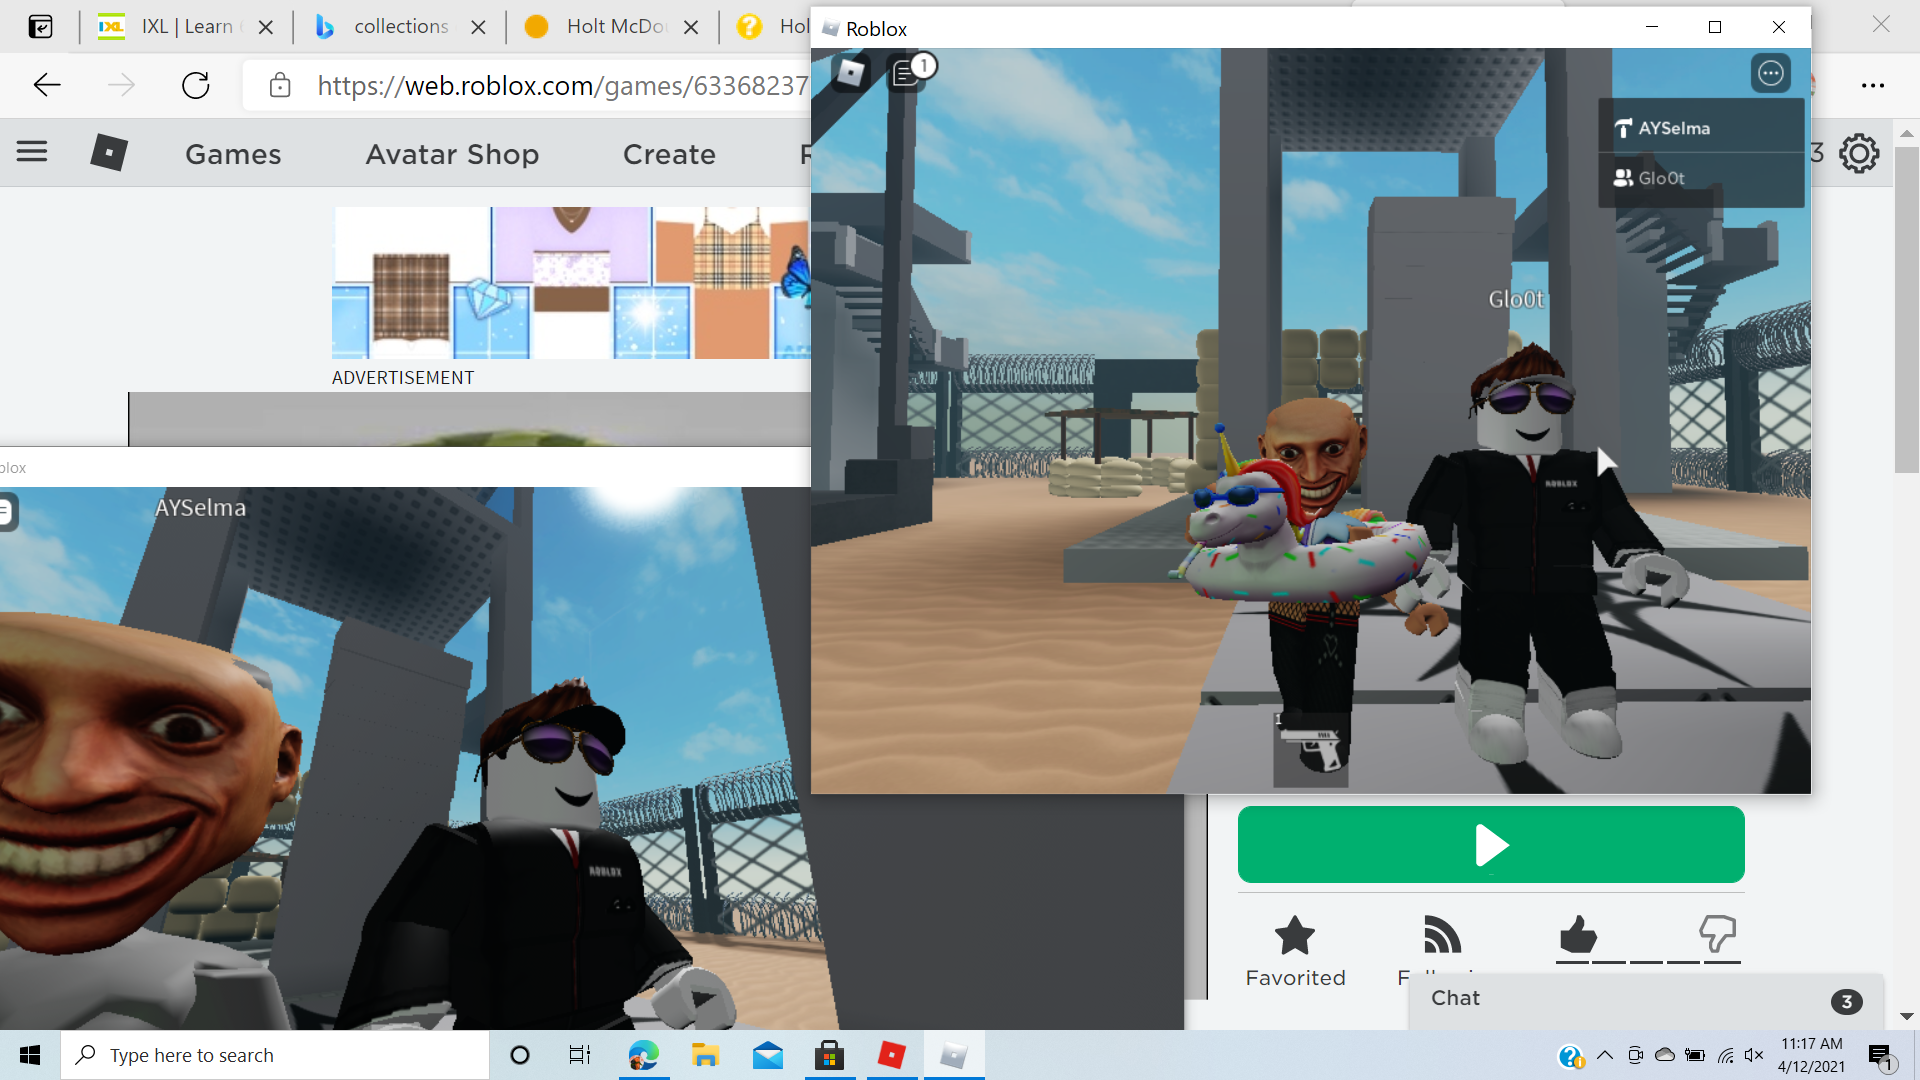 Yasss I Finally Found Out How To Play With 2 Roblox Accounts On My Computer At The Same Time Ddddd Fandom - how to play 2 roblox accounts at the same time